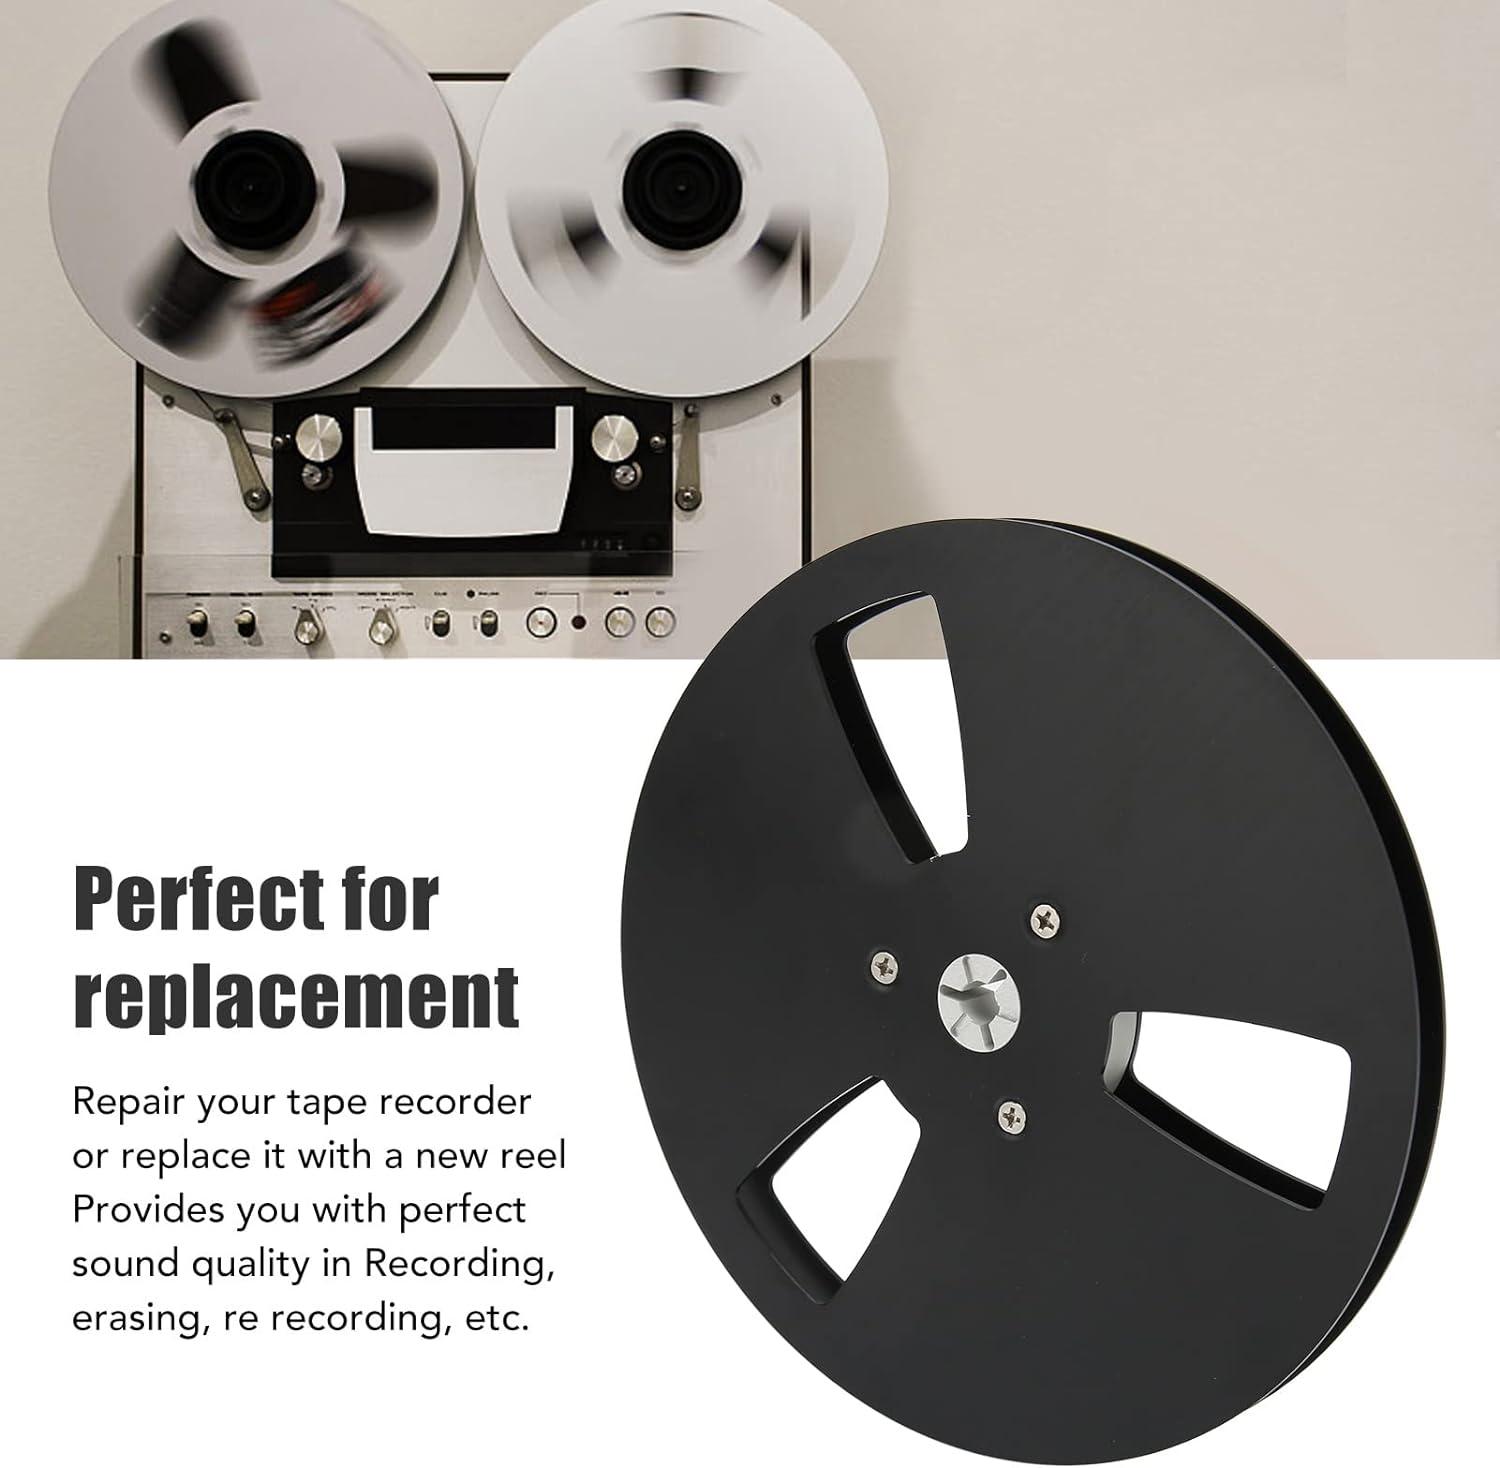 7 Inch Takeup Reel Empty Aluminum Alloy Take Up Reel to Reel Small Hub with  3 Holes Design Universal Nab Take Up for 1/4 Inch Reel to Reel Tape